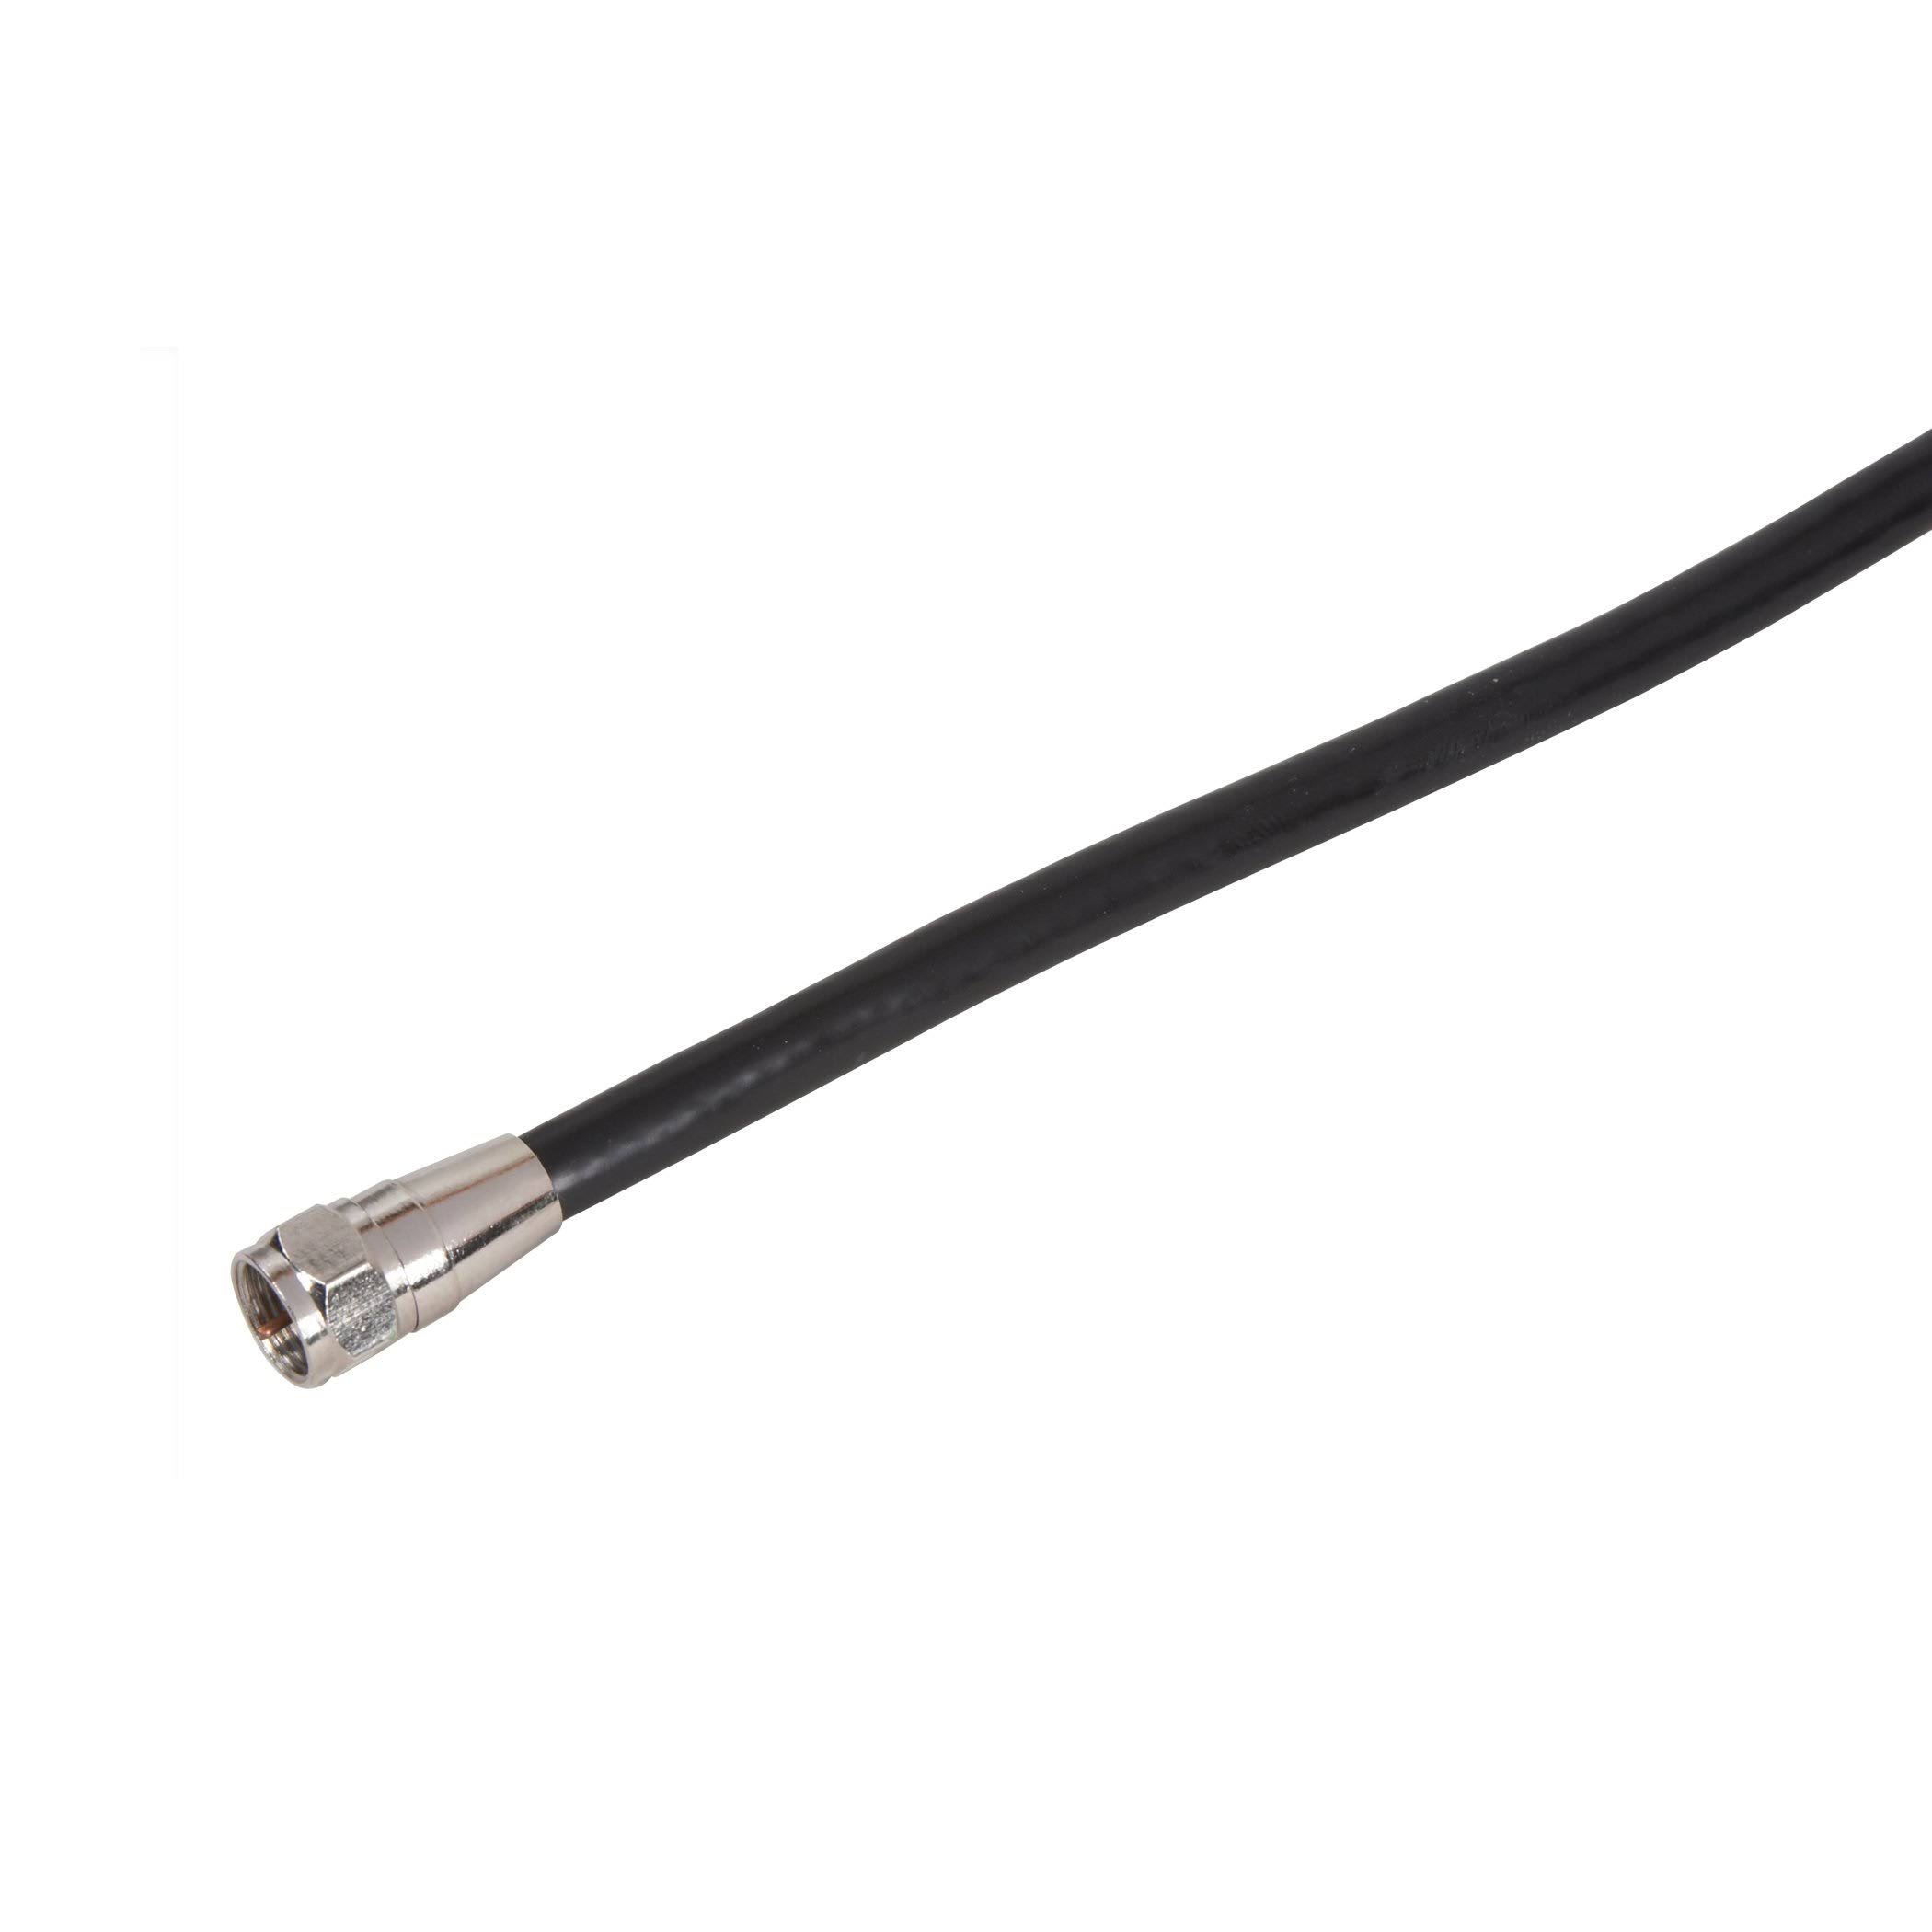 American Tack and Hardware VG101206 Coax Cable - RG6, 12', Black